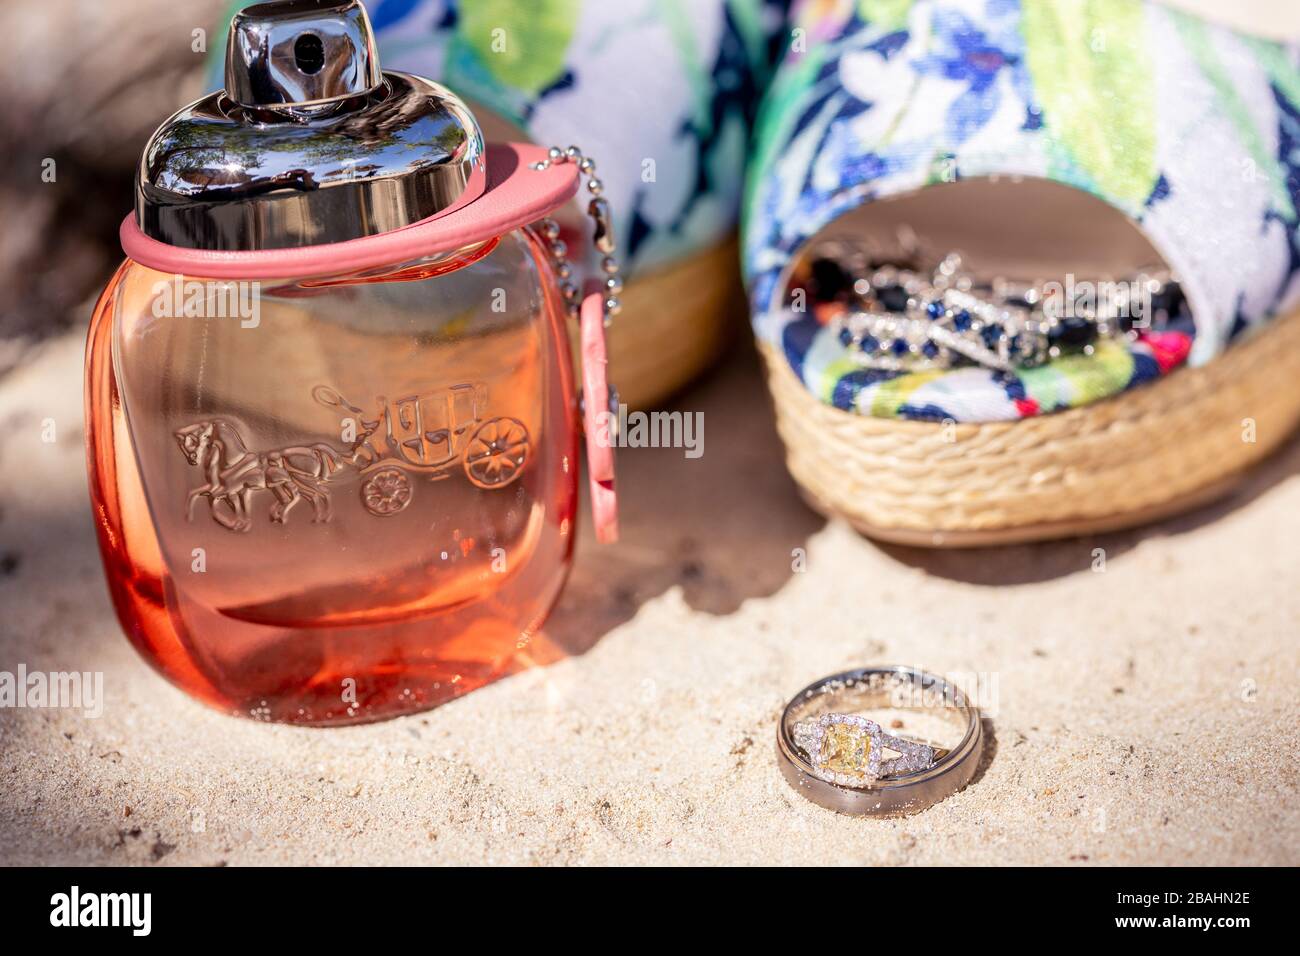 Wedding item splay at an exotic resort in Jamaica, including perfume, shoes, and wedding bands Stock Photo